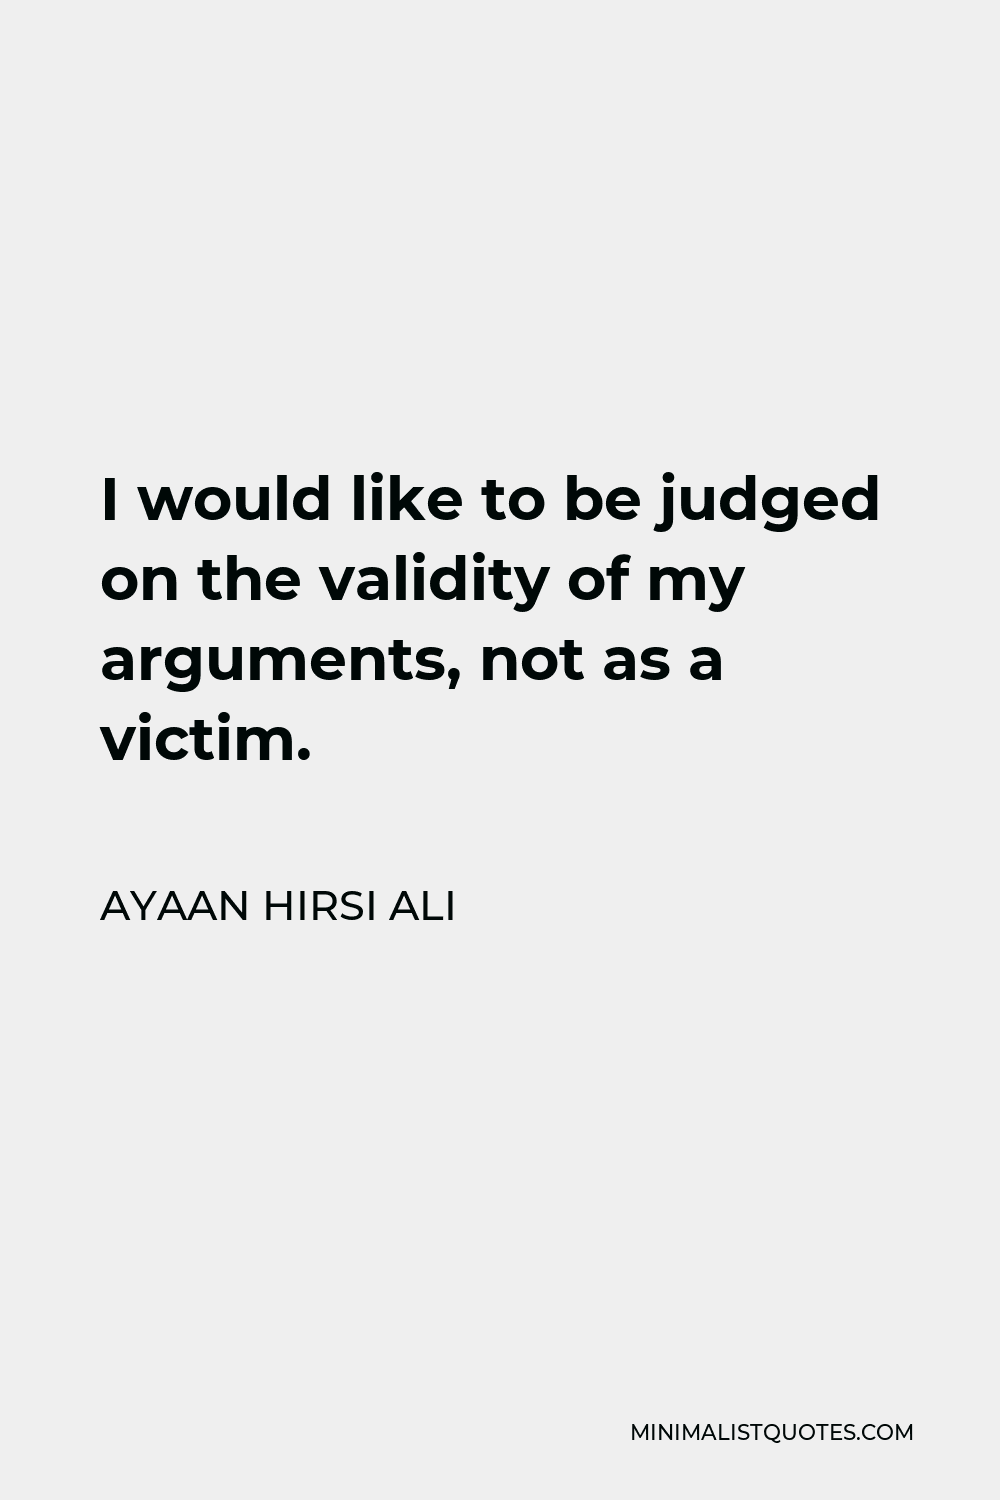 Ayaan Hirsi Ali Quote - I would like to be judged on the validity of my arguments, not as a victim.